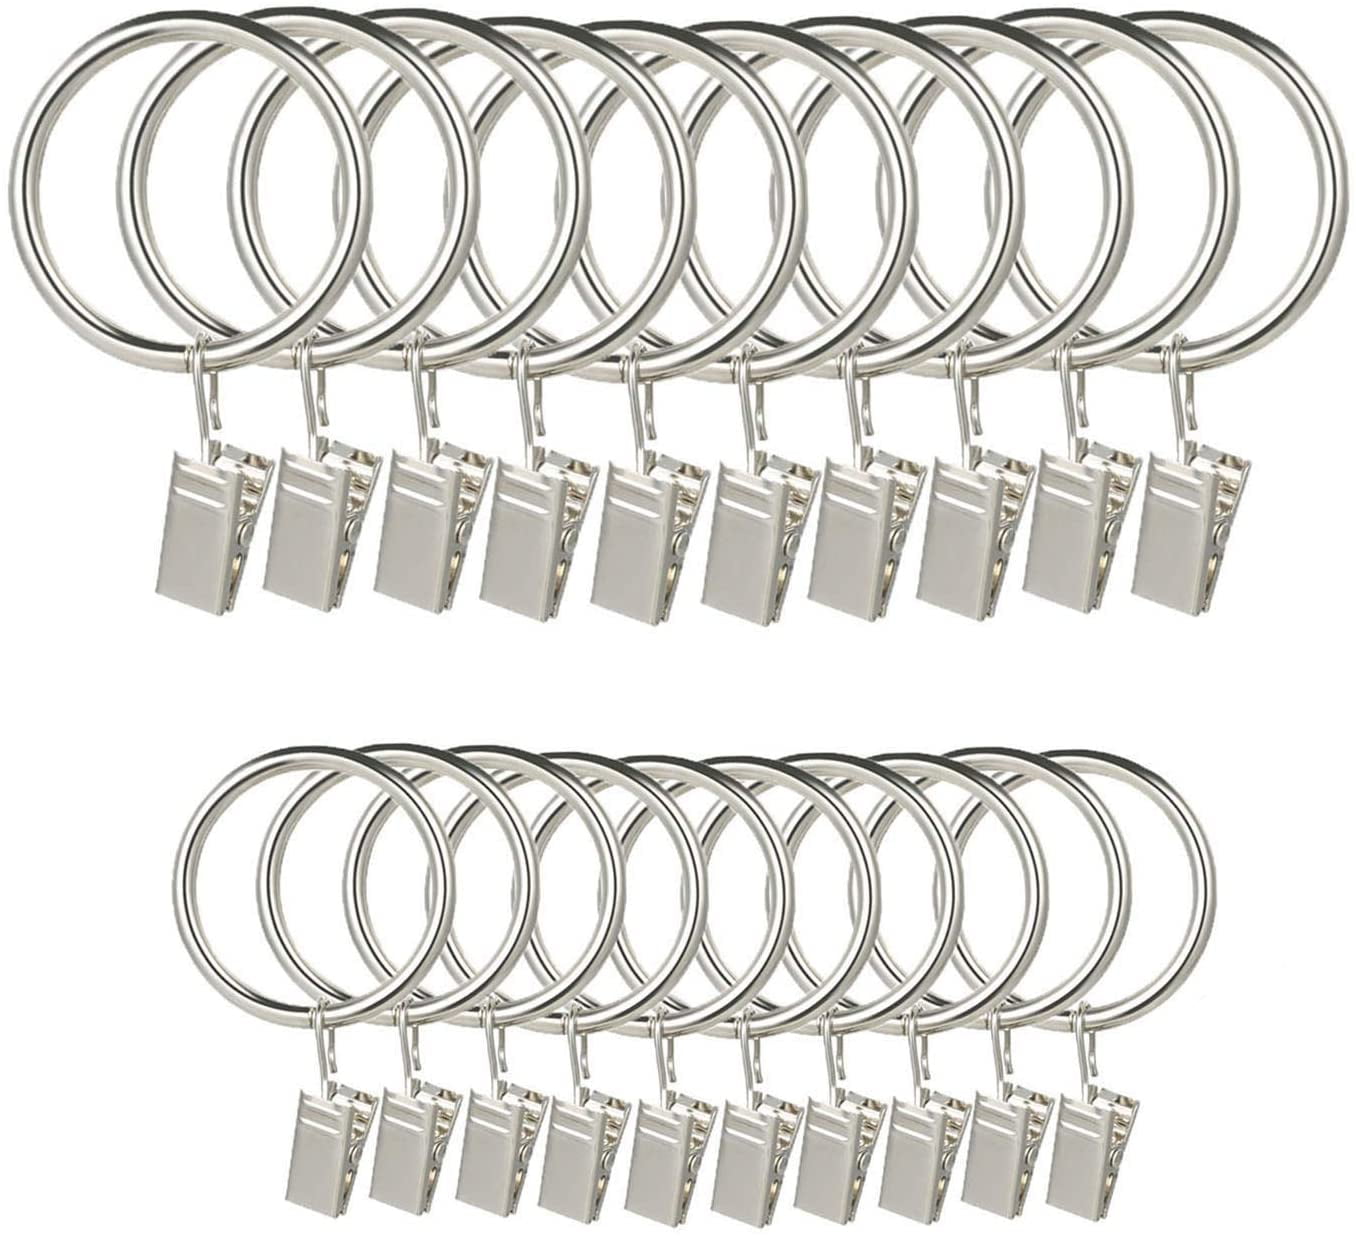 28 30mm Strong Metal Curtain Pole Rings Hooks Heavy Duty Voile with Clips Eyelet 